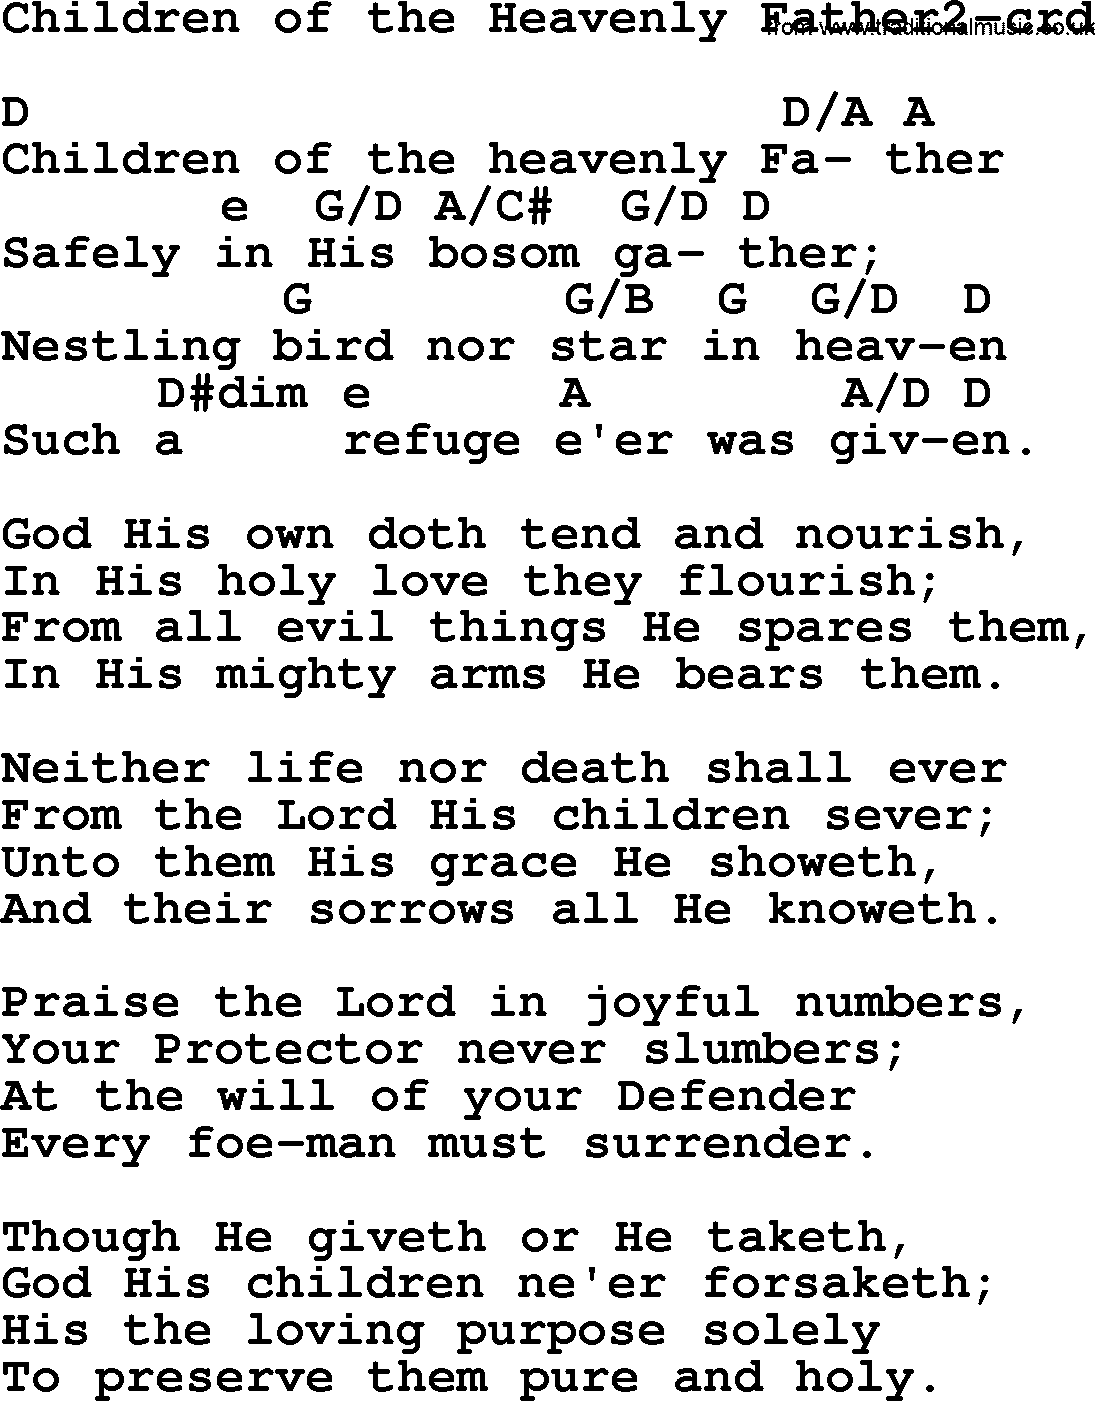 Top 500 Hymn: Children Of The Heavenly Father2, lyrics and chords